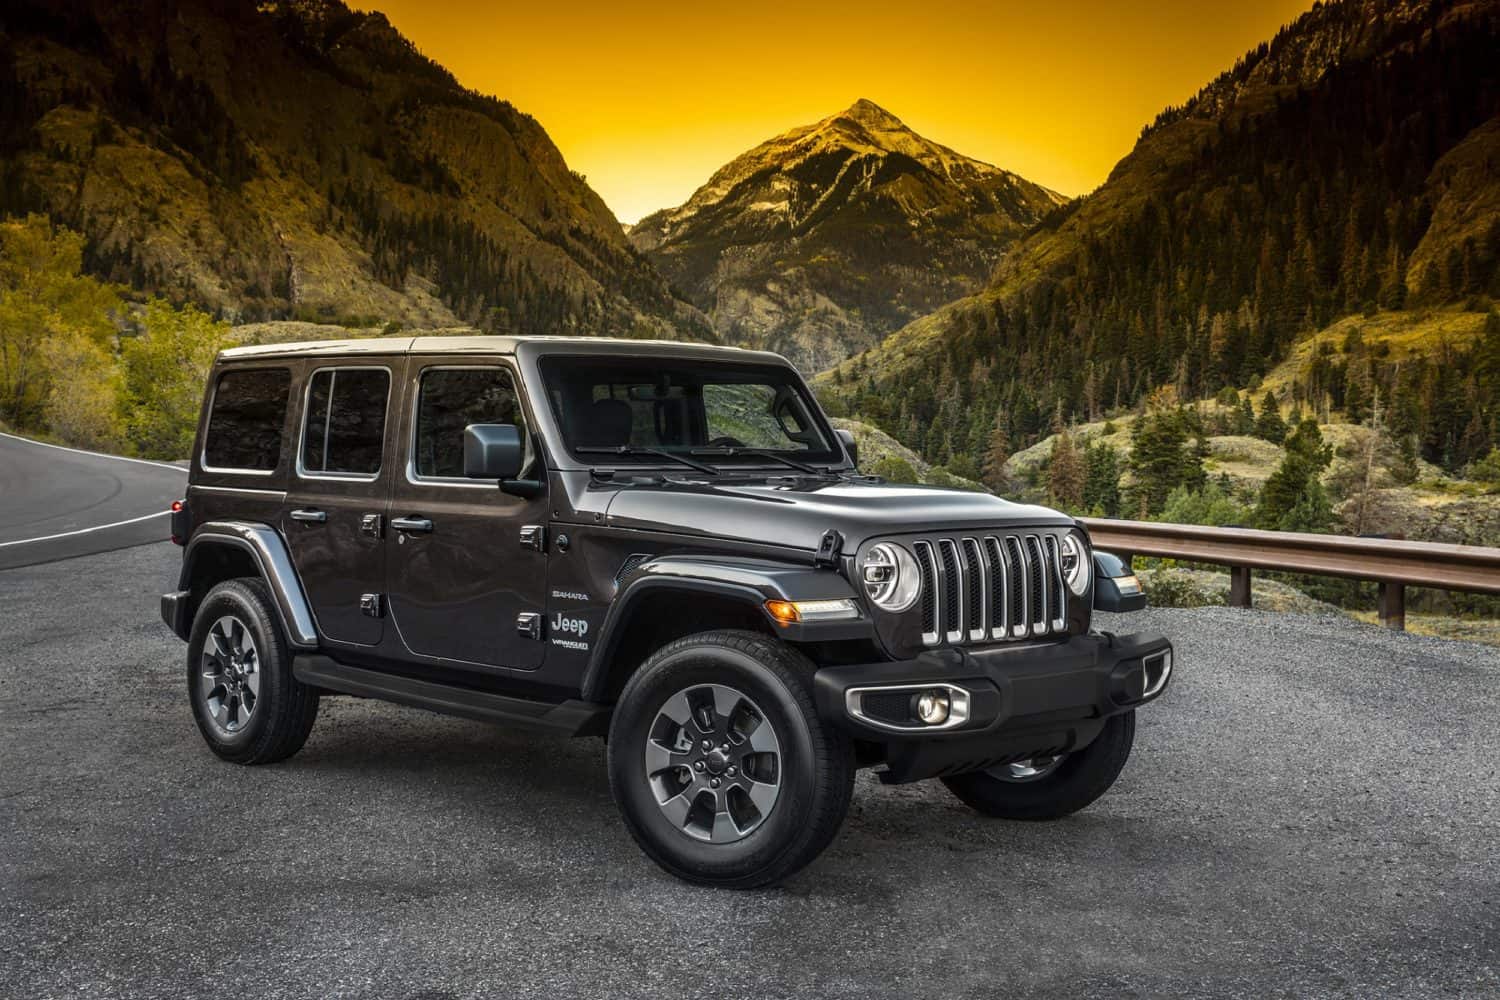 Next-Gen 2018 Jeep Wrangler Is Out - Specs, Engine, Competition & Price